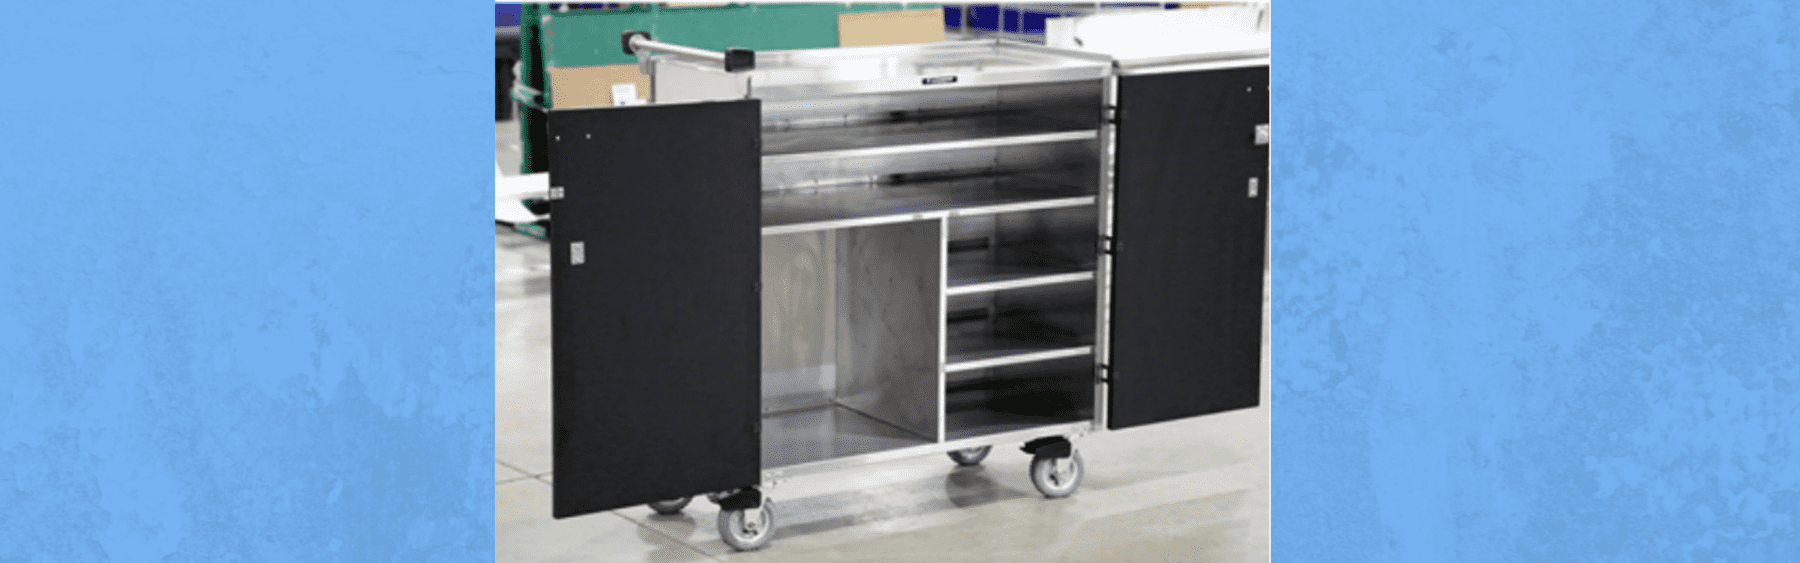 custom delivery and bussing cart